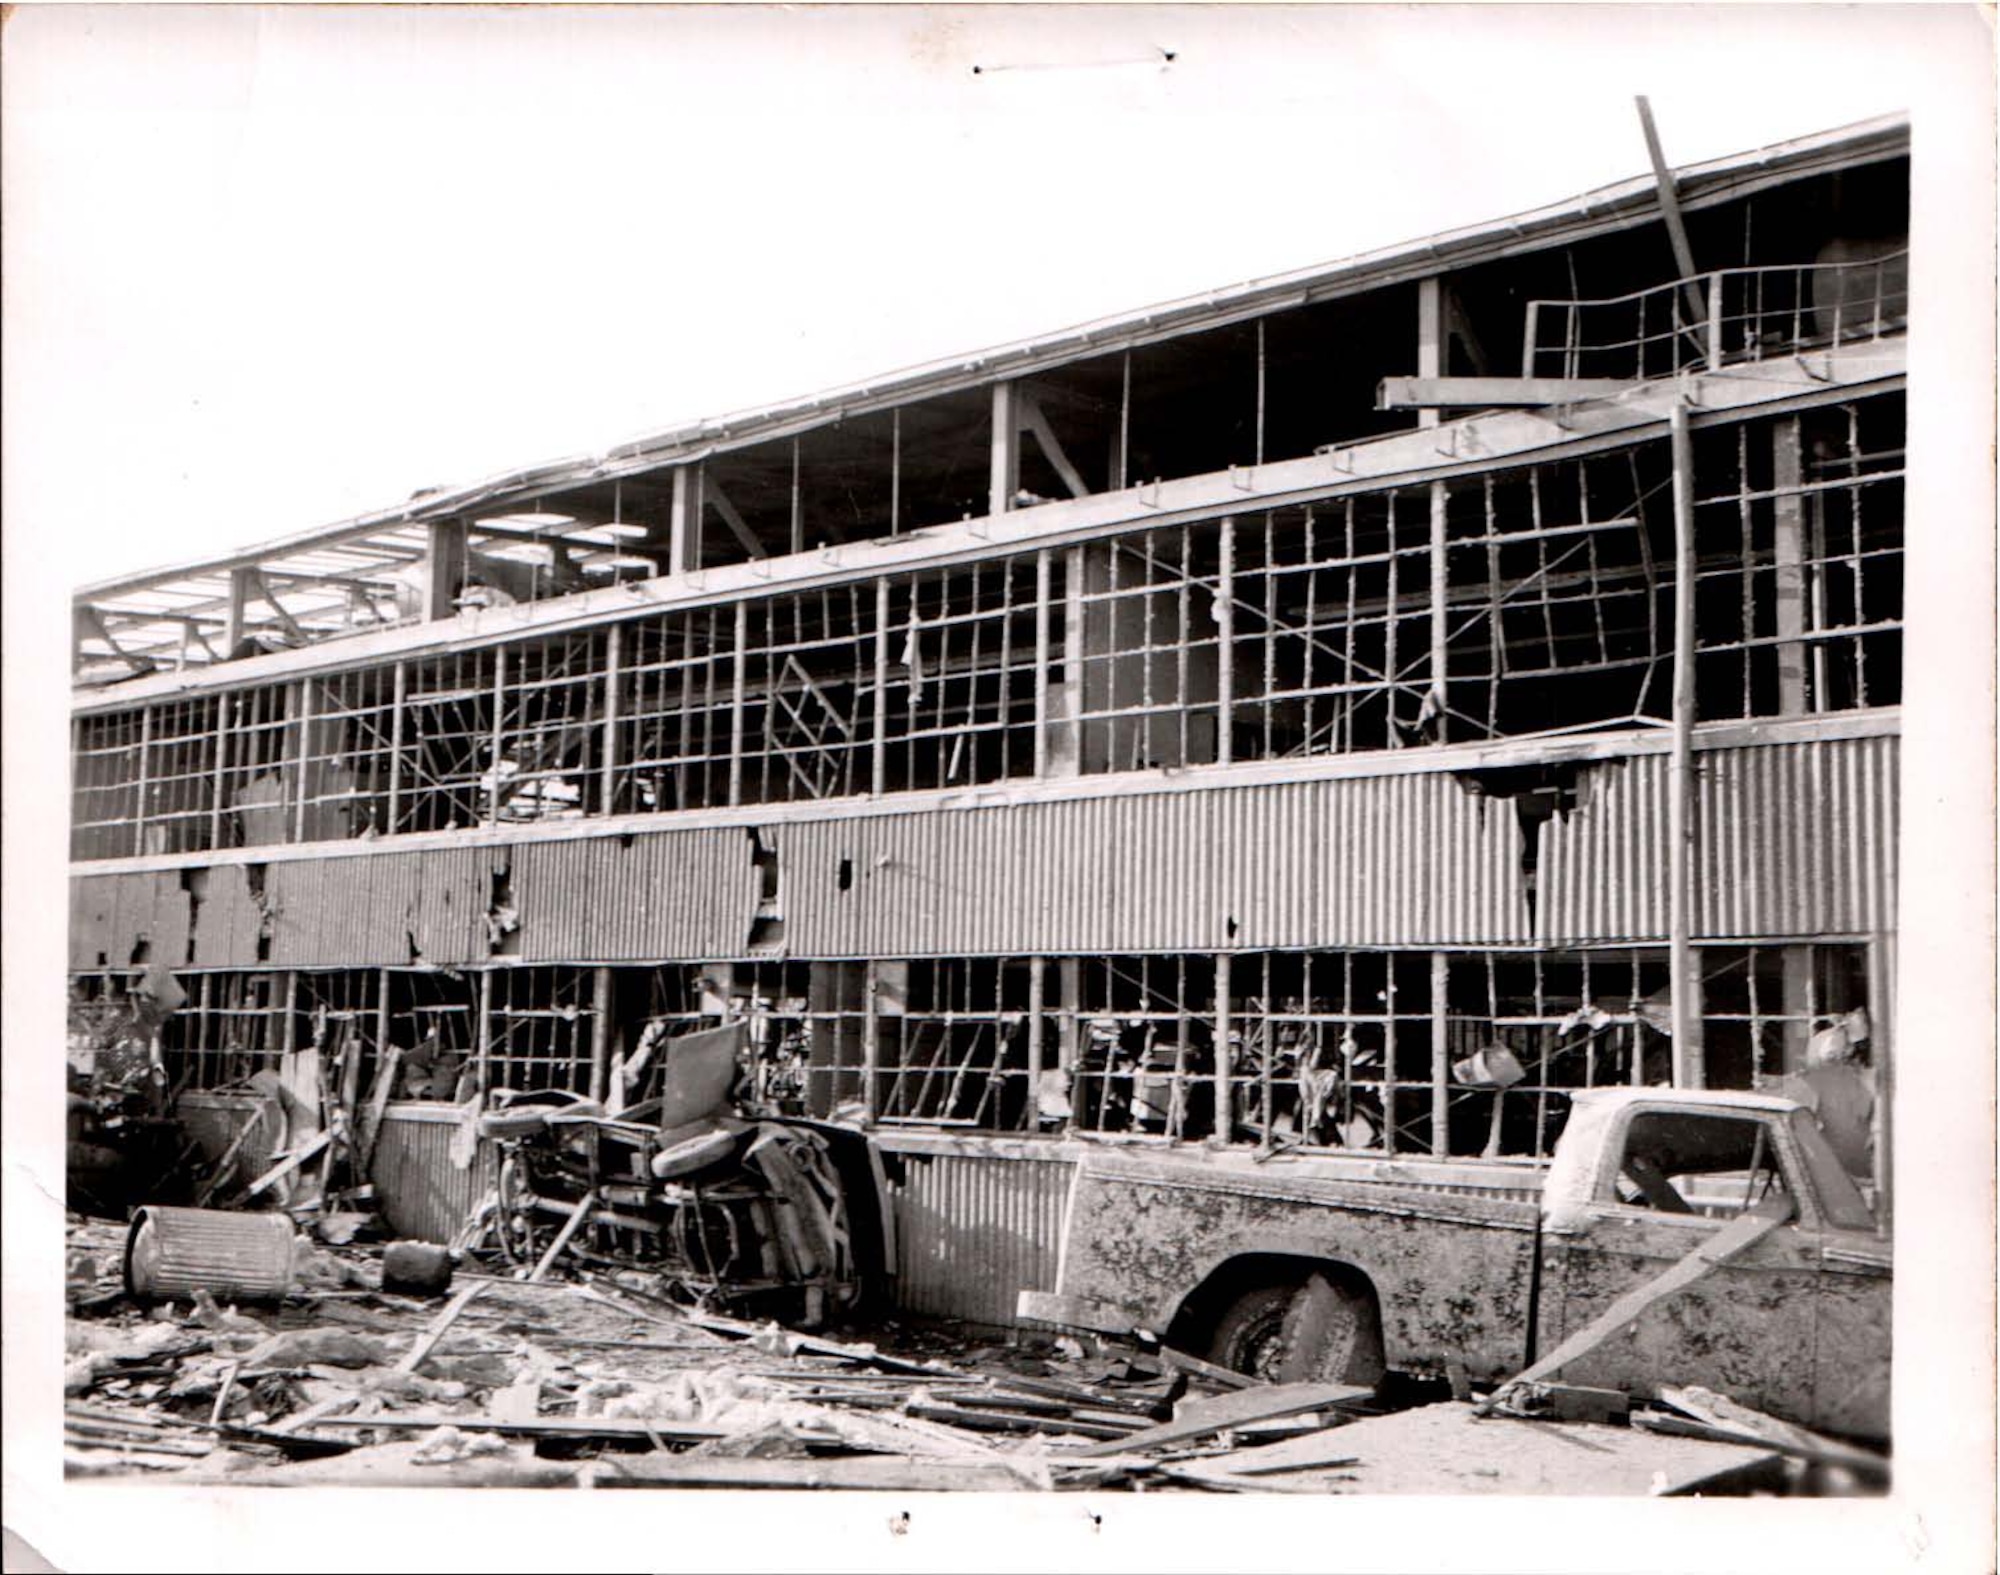 A tornado hit Sheppard in 1964, damaging the base and its facilities. Tornadoes have been known to lift up entire houses and produce winds up to 300 mph. (Courtesy Photo)